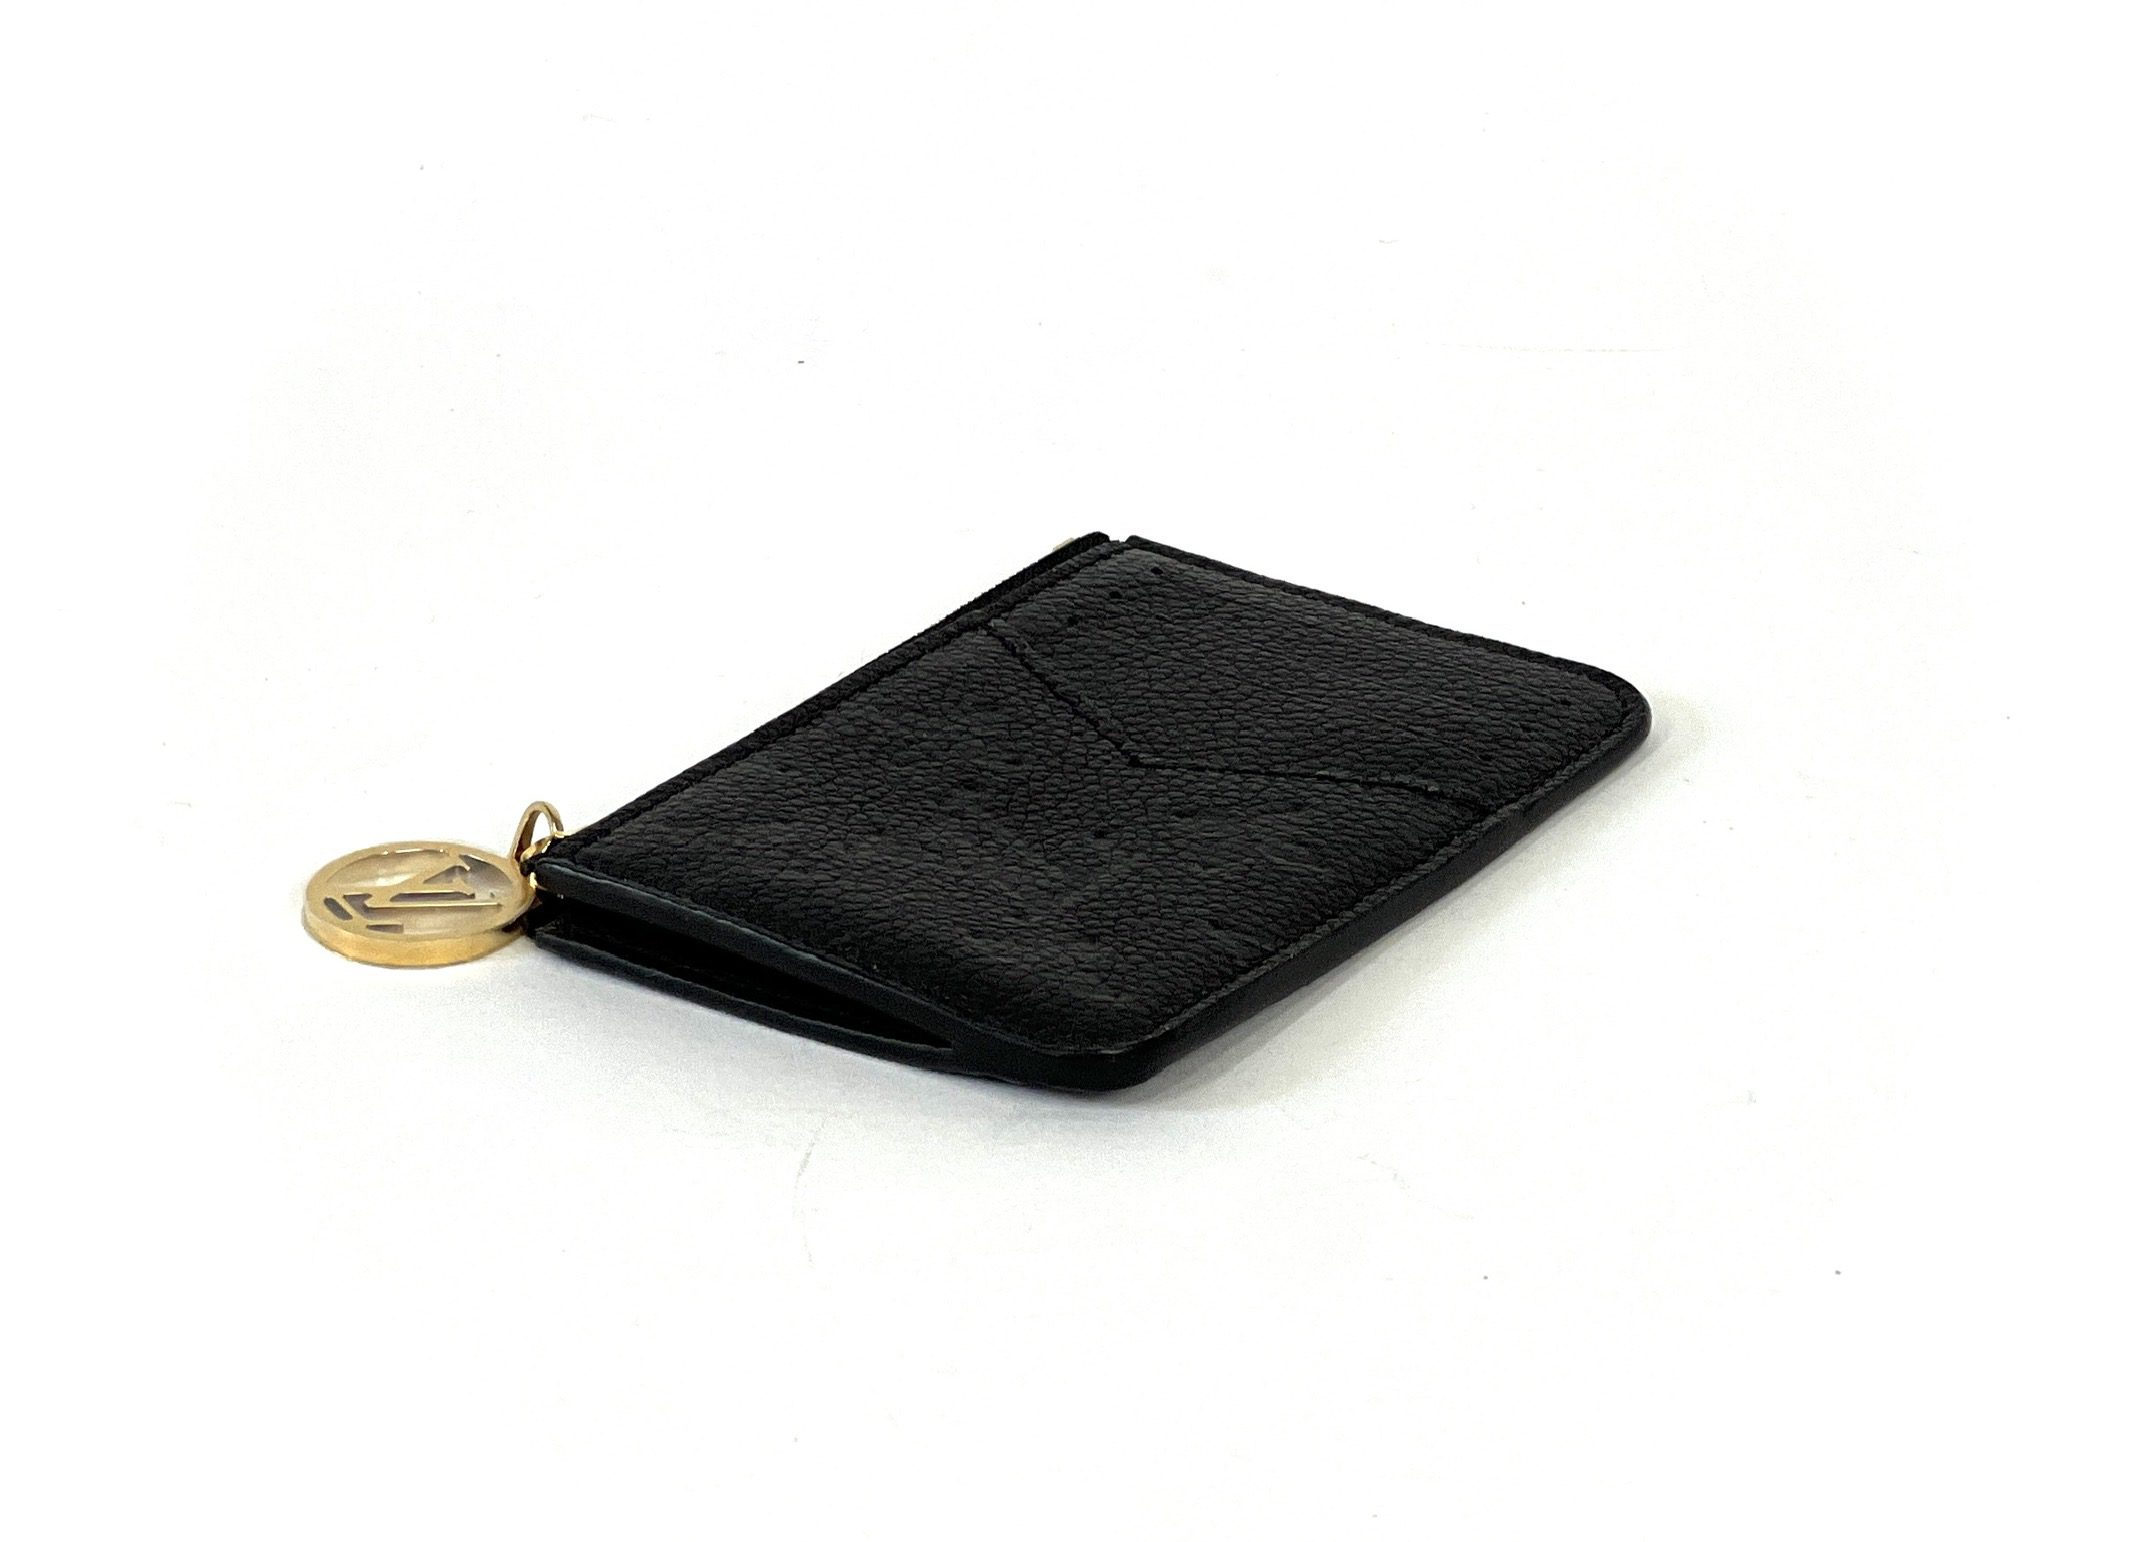 Romy Card Holder Monogram Empreinte Leather - Wallets and Small Leather  Goods